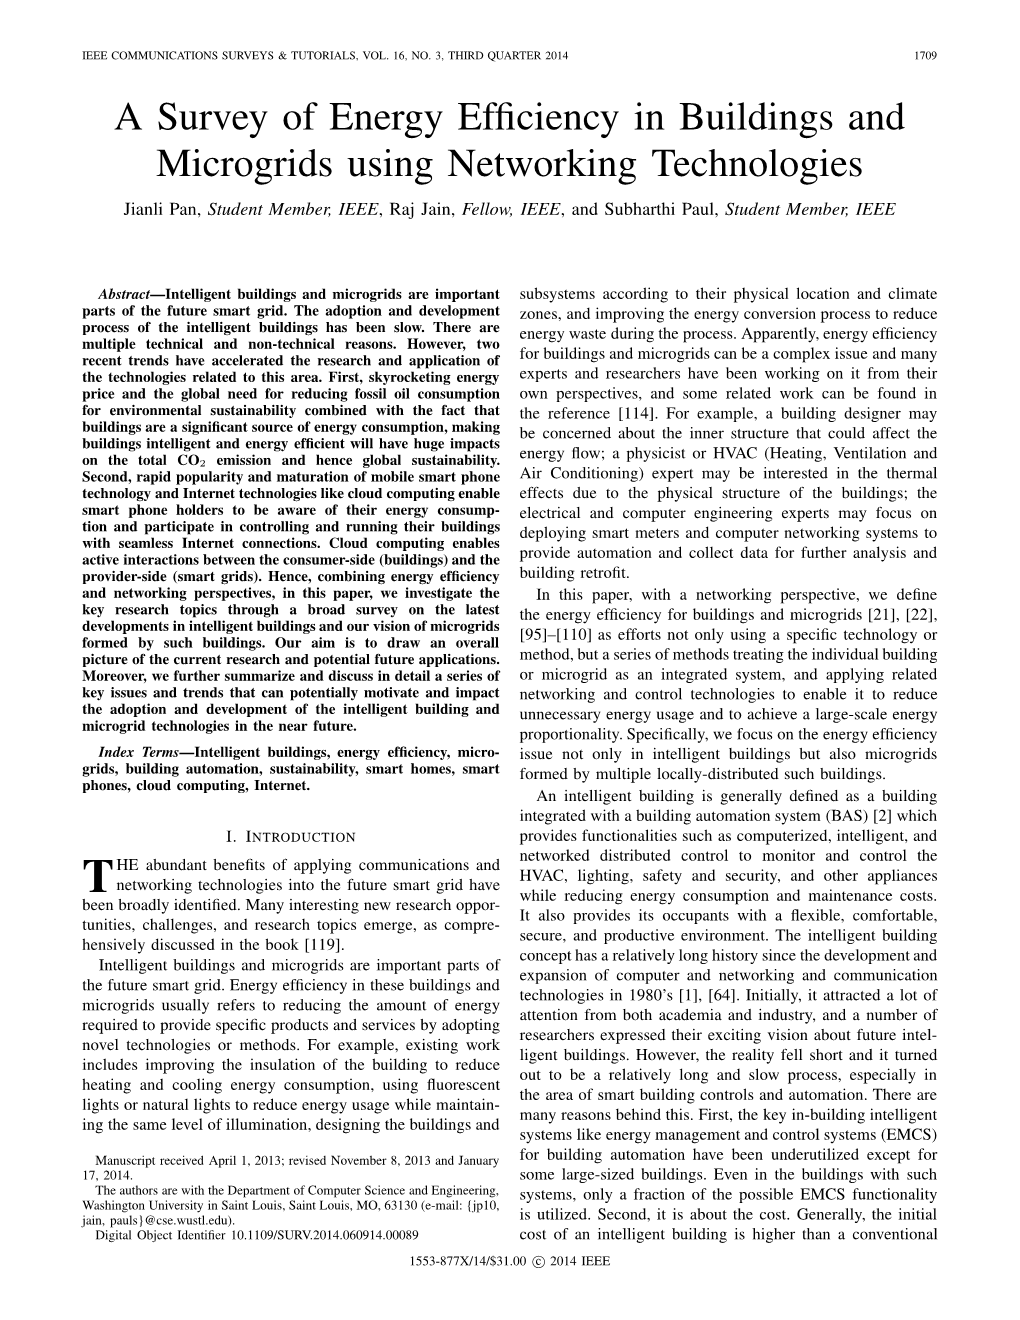 A Survey of Energy Efficiency in Buildings and Microgrids Using Networking Technologies 1711